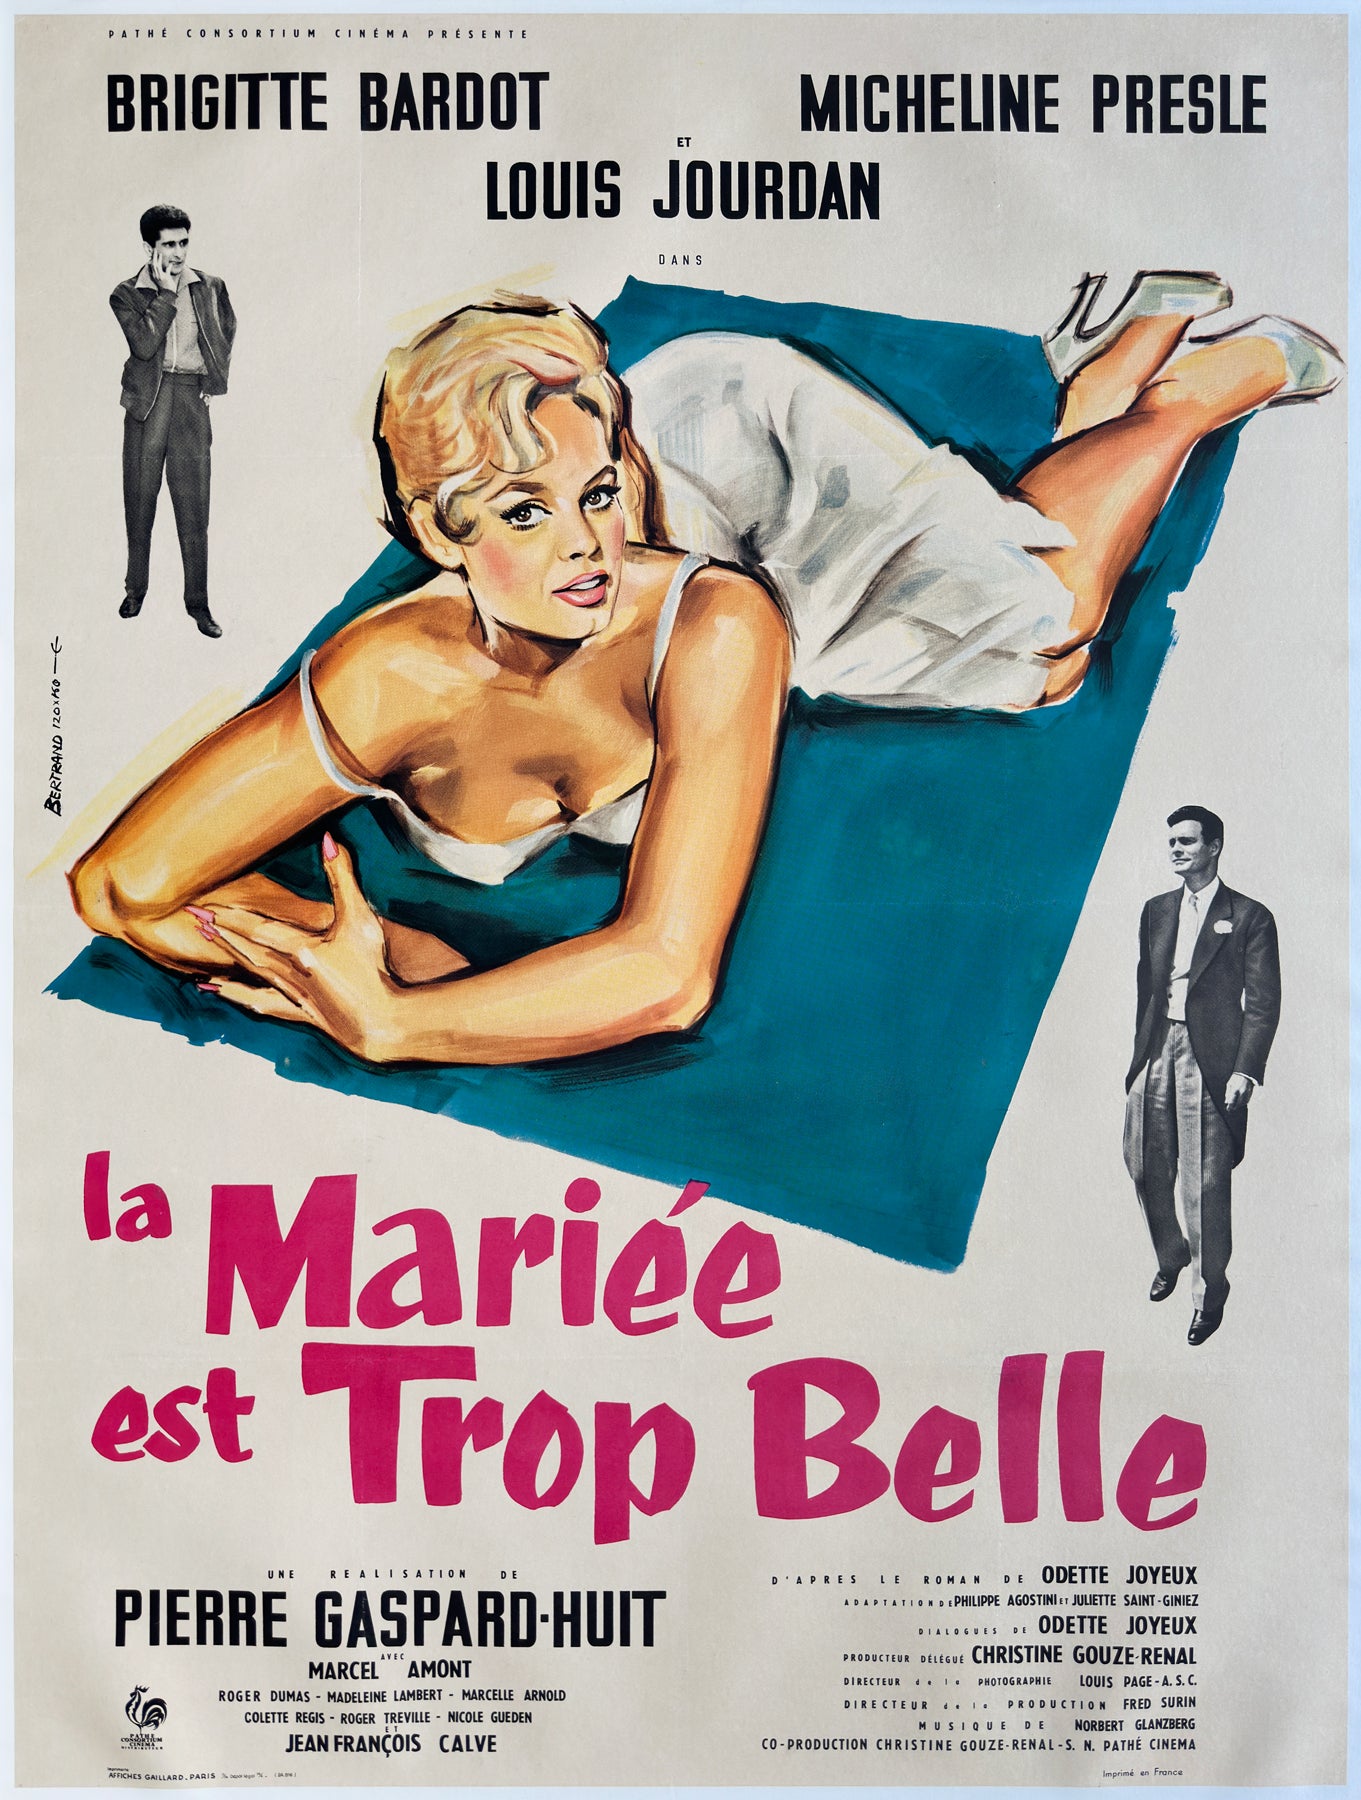 The Bride is Much Too Beautiful 1956 French Grande Film Movie Poster, Andre Bertrand